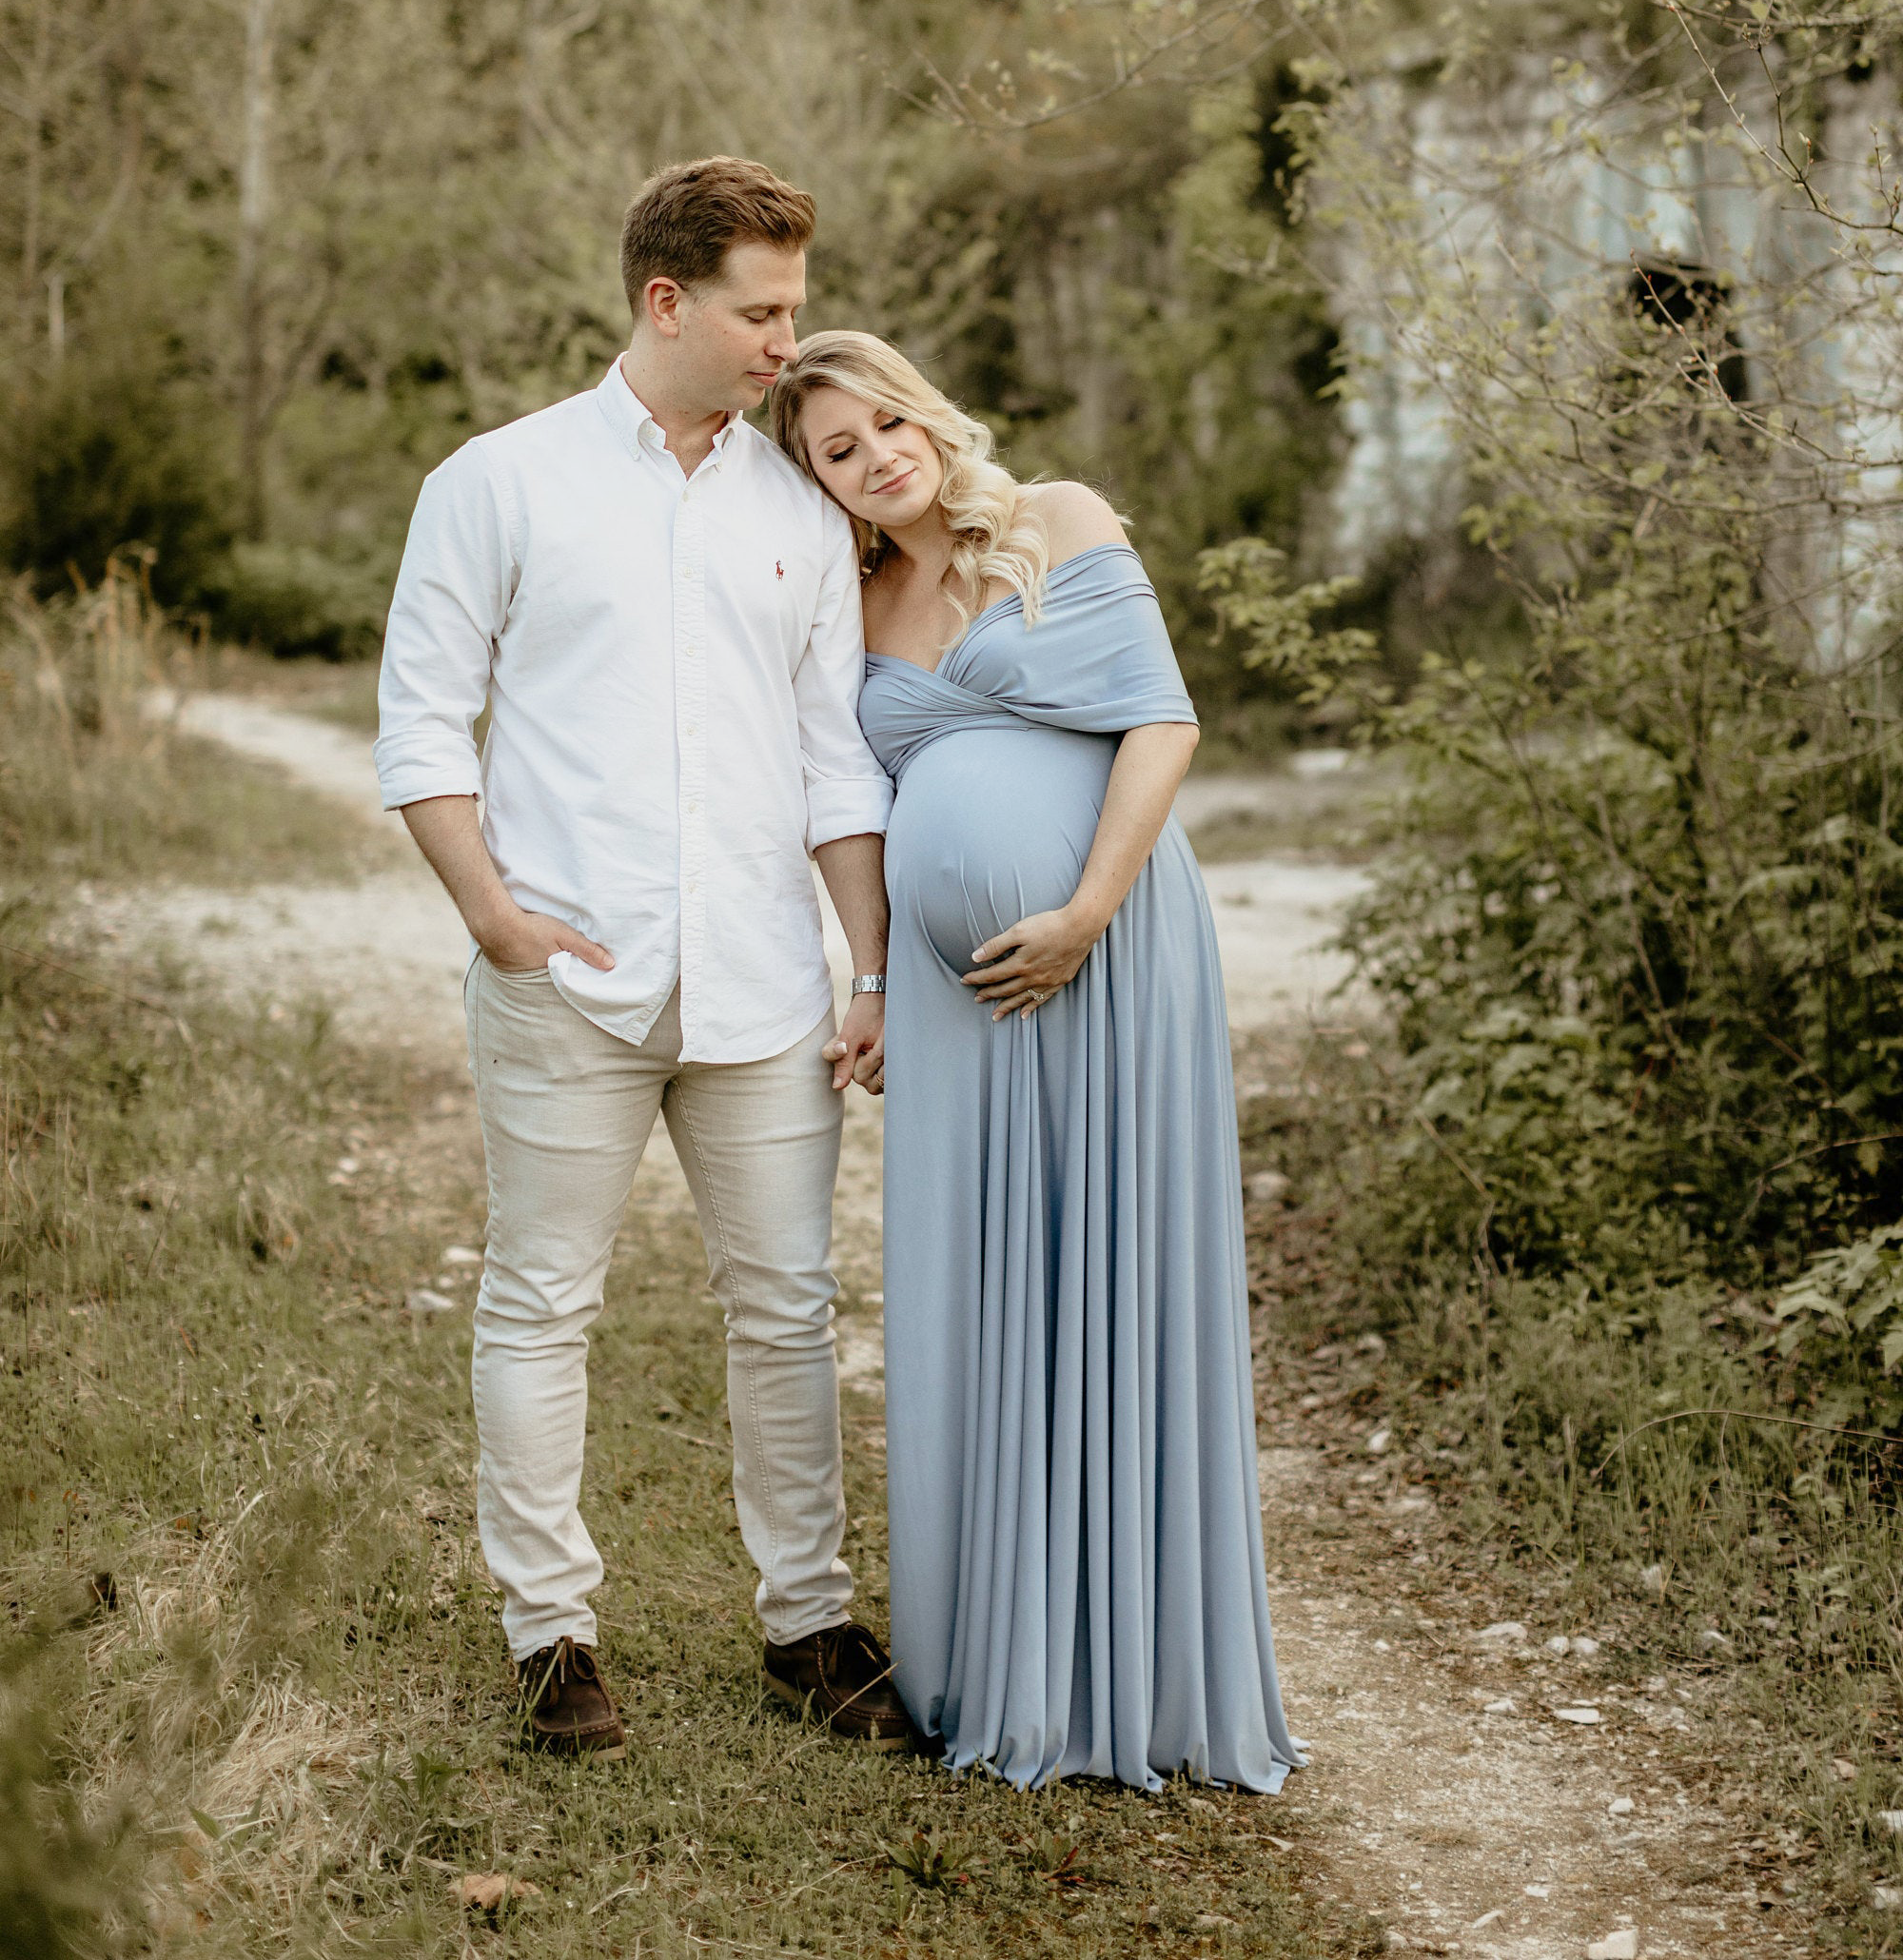 Maternity Dress for Baby Shower Photoshoot - Made In USA